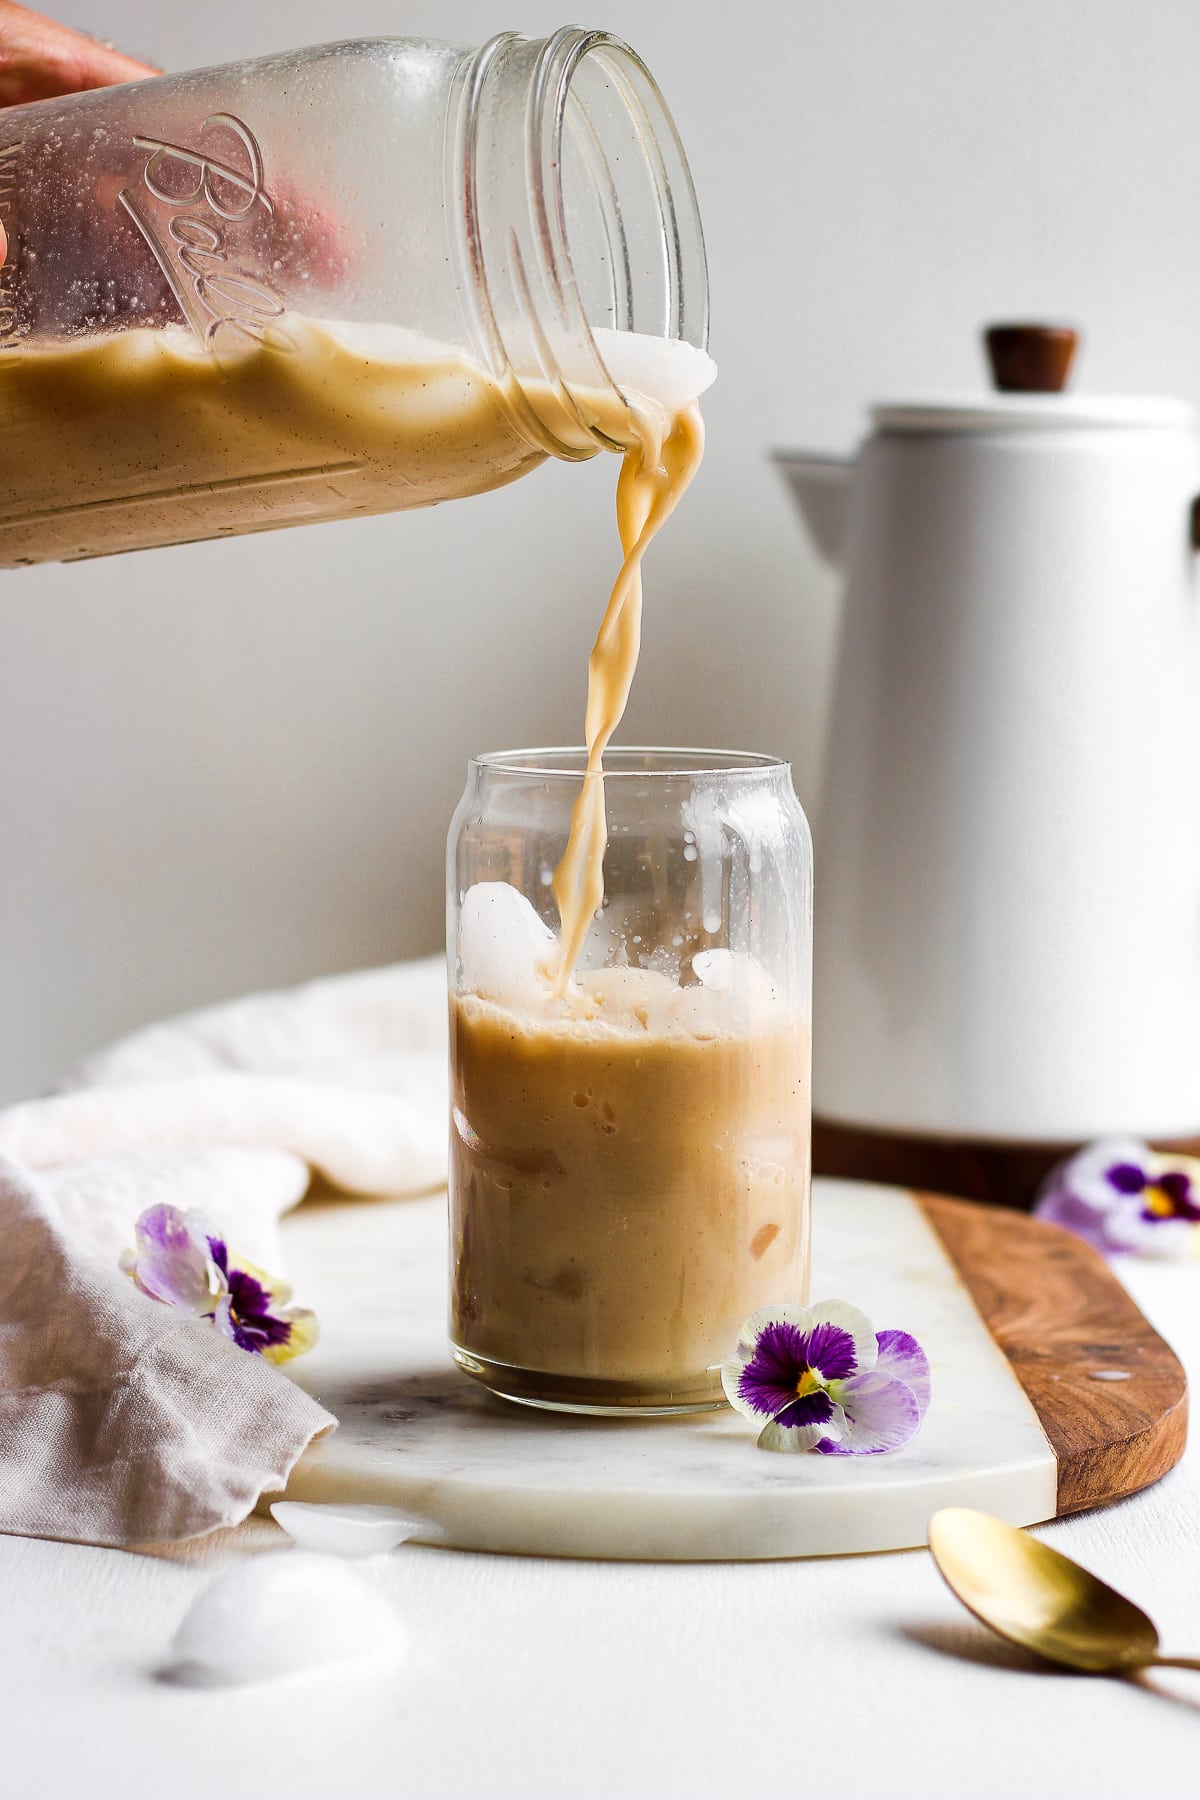 Iced Bulletproof Cold Brew Coffee